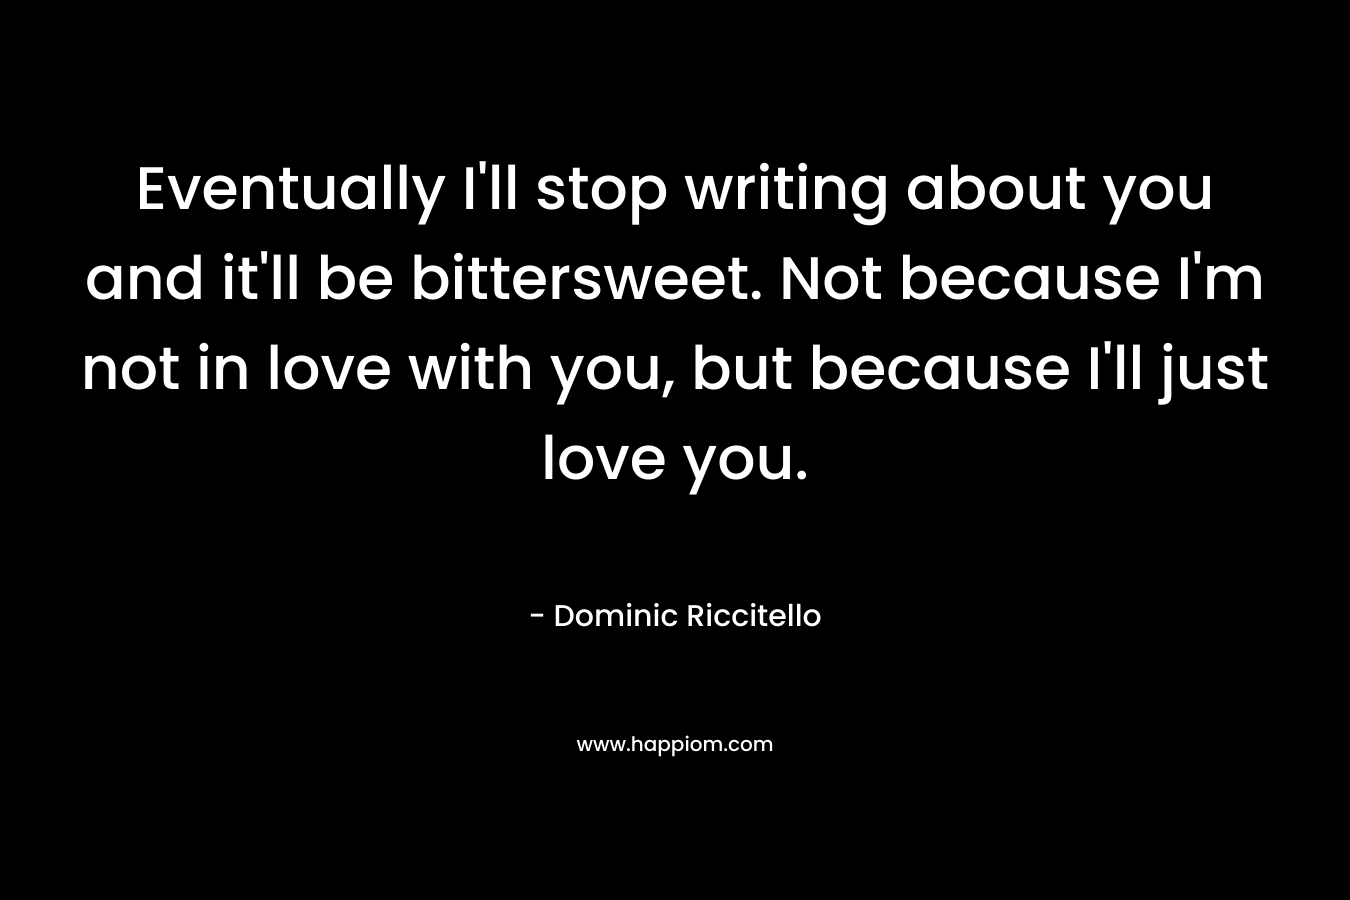 Eventually I'll stop writing about you and it'll be bittersweet. Not because I'm not in love with you, but because I'll just love you.